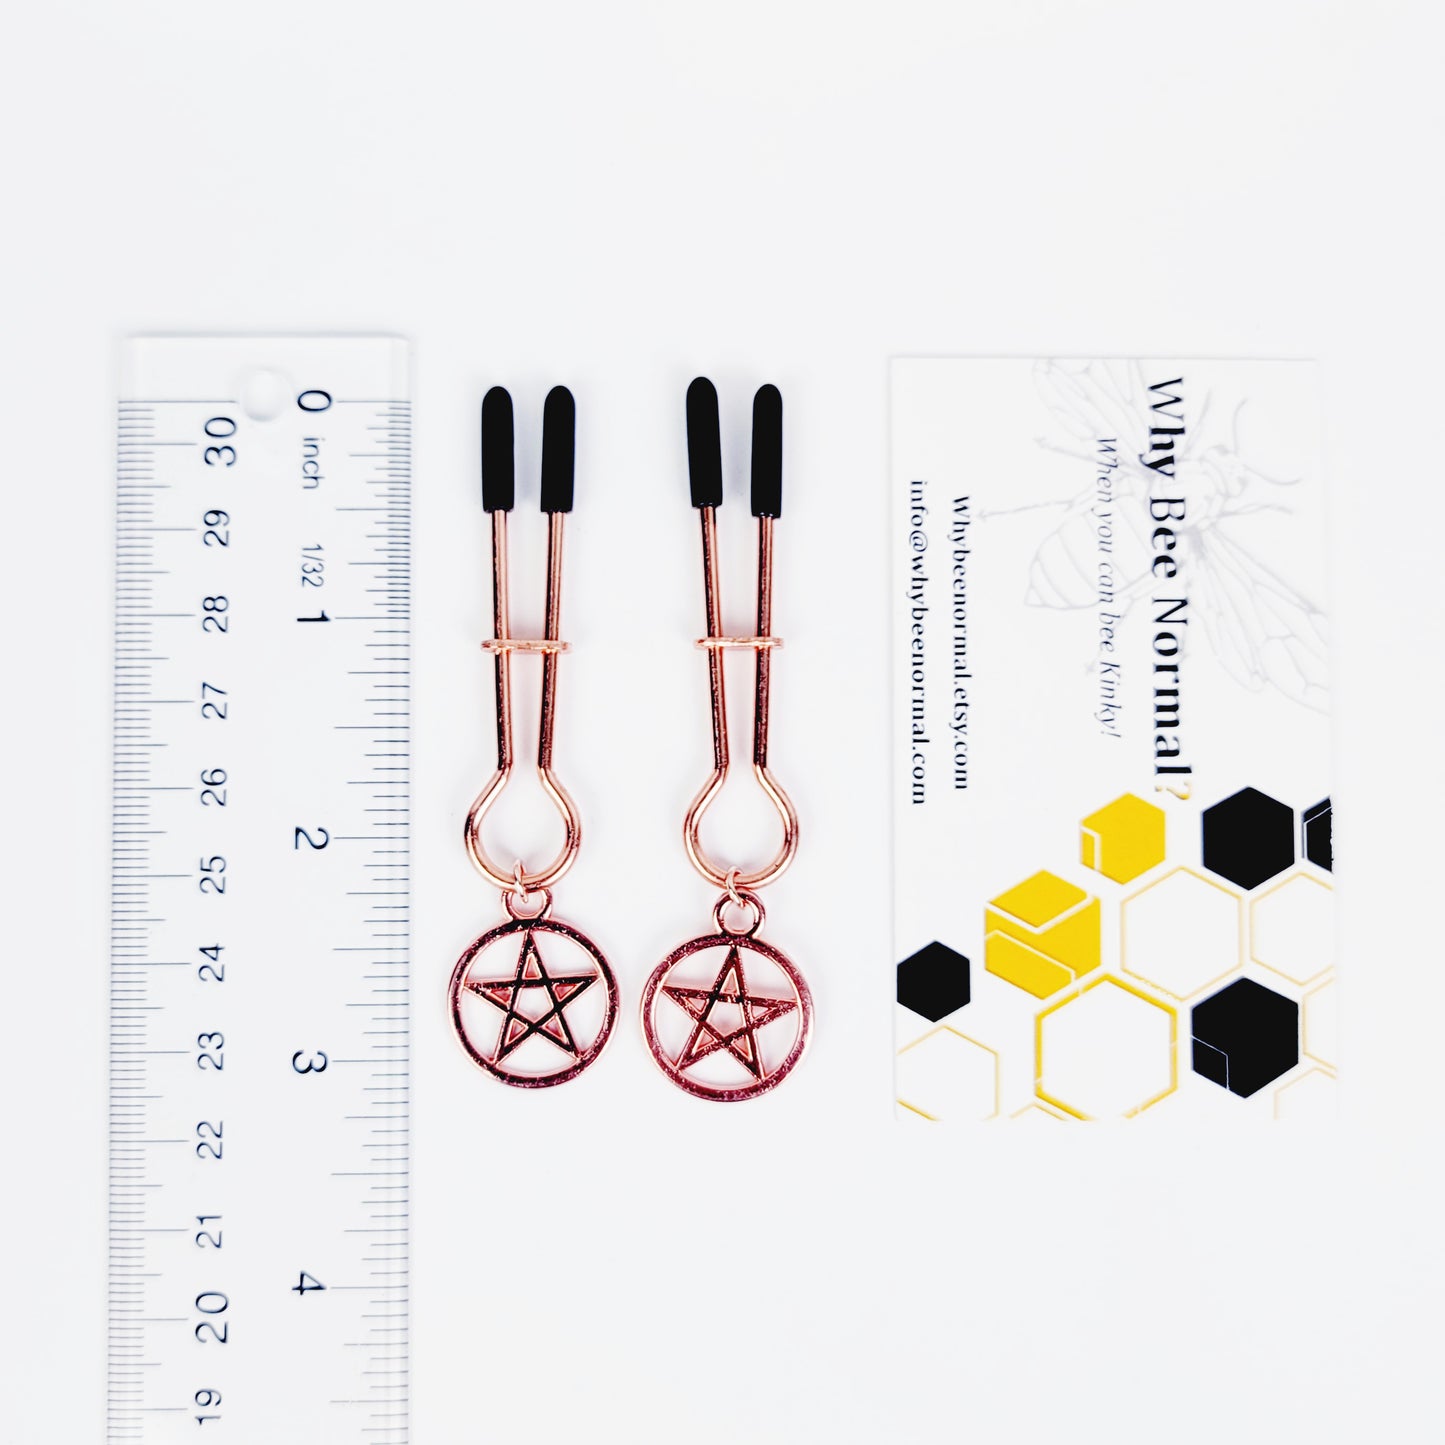 Pentacle Nipple Clamps, Straight Tweezer Style, in Gold, Silver, or Rose Gold